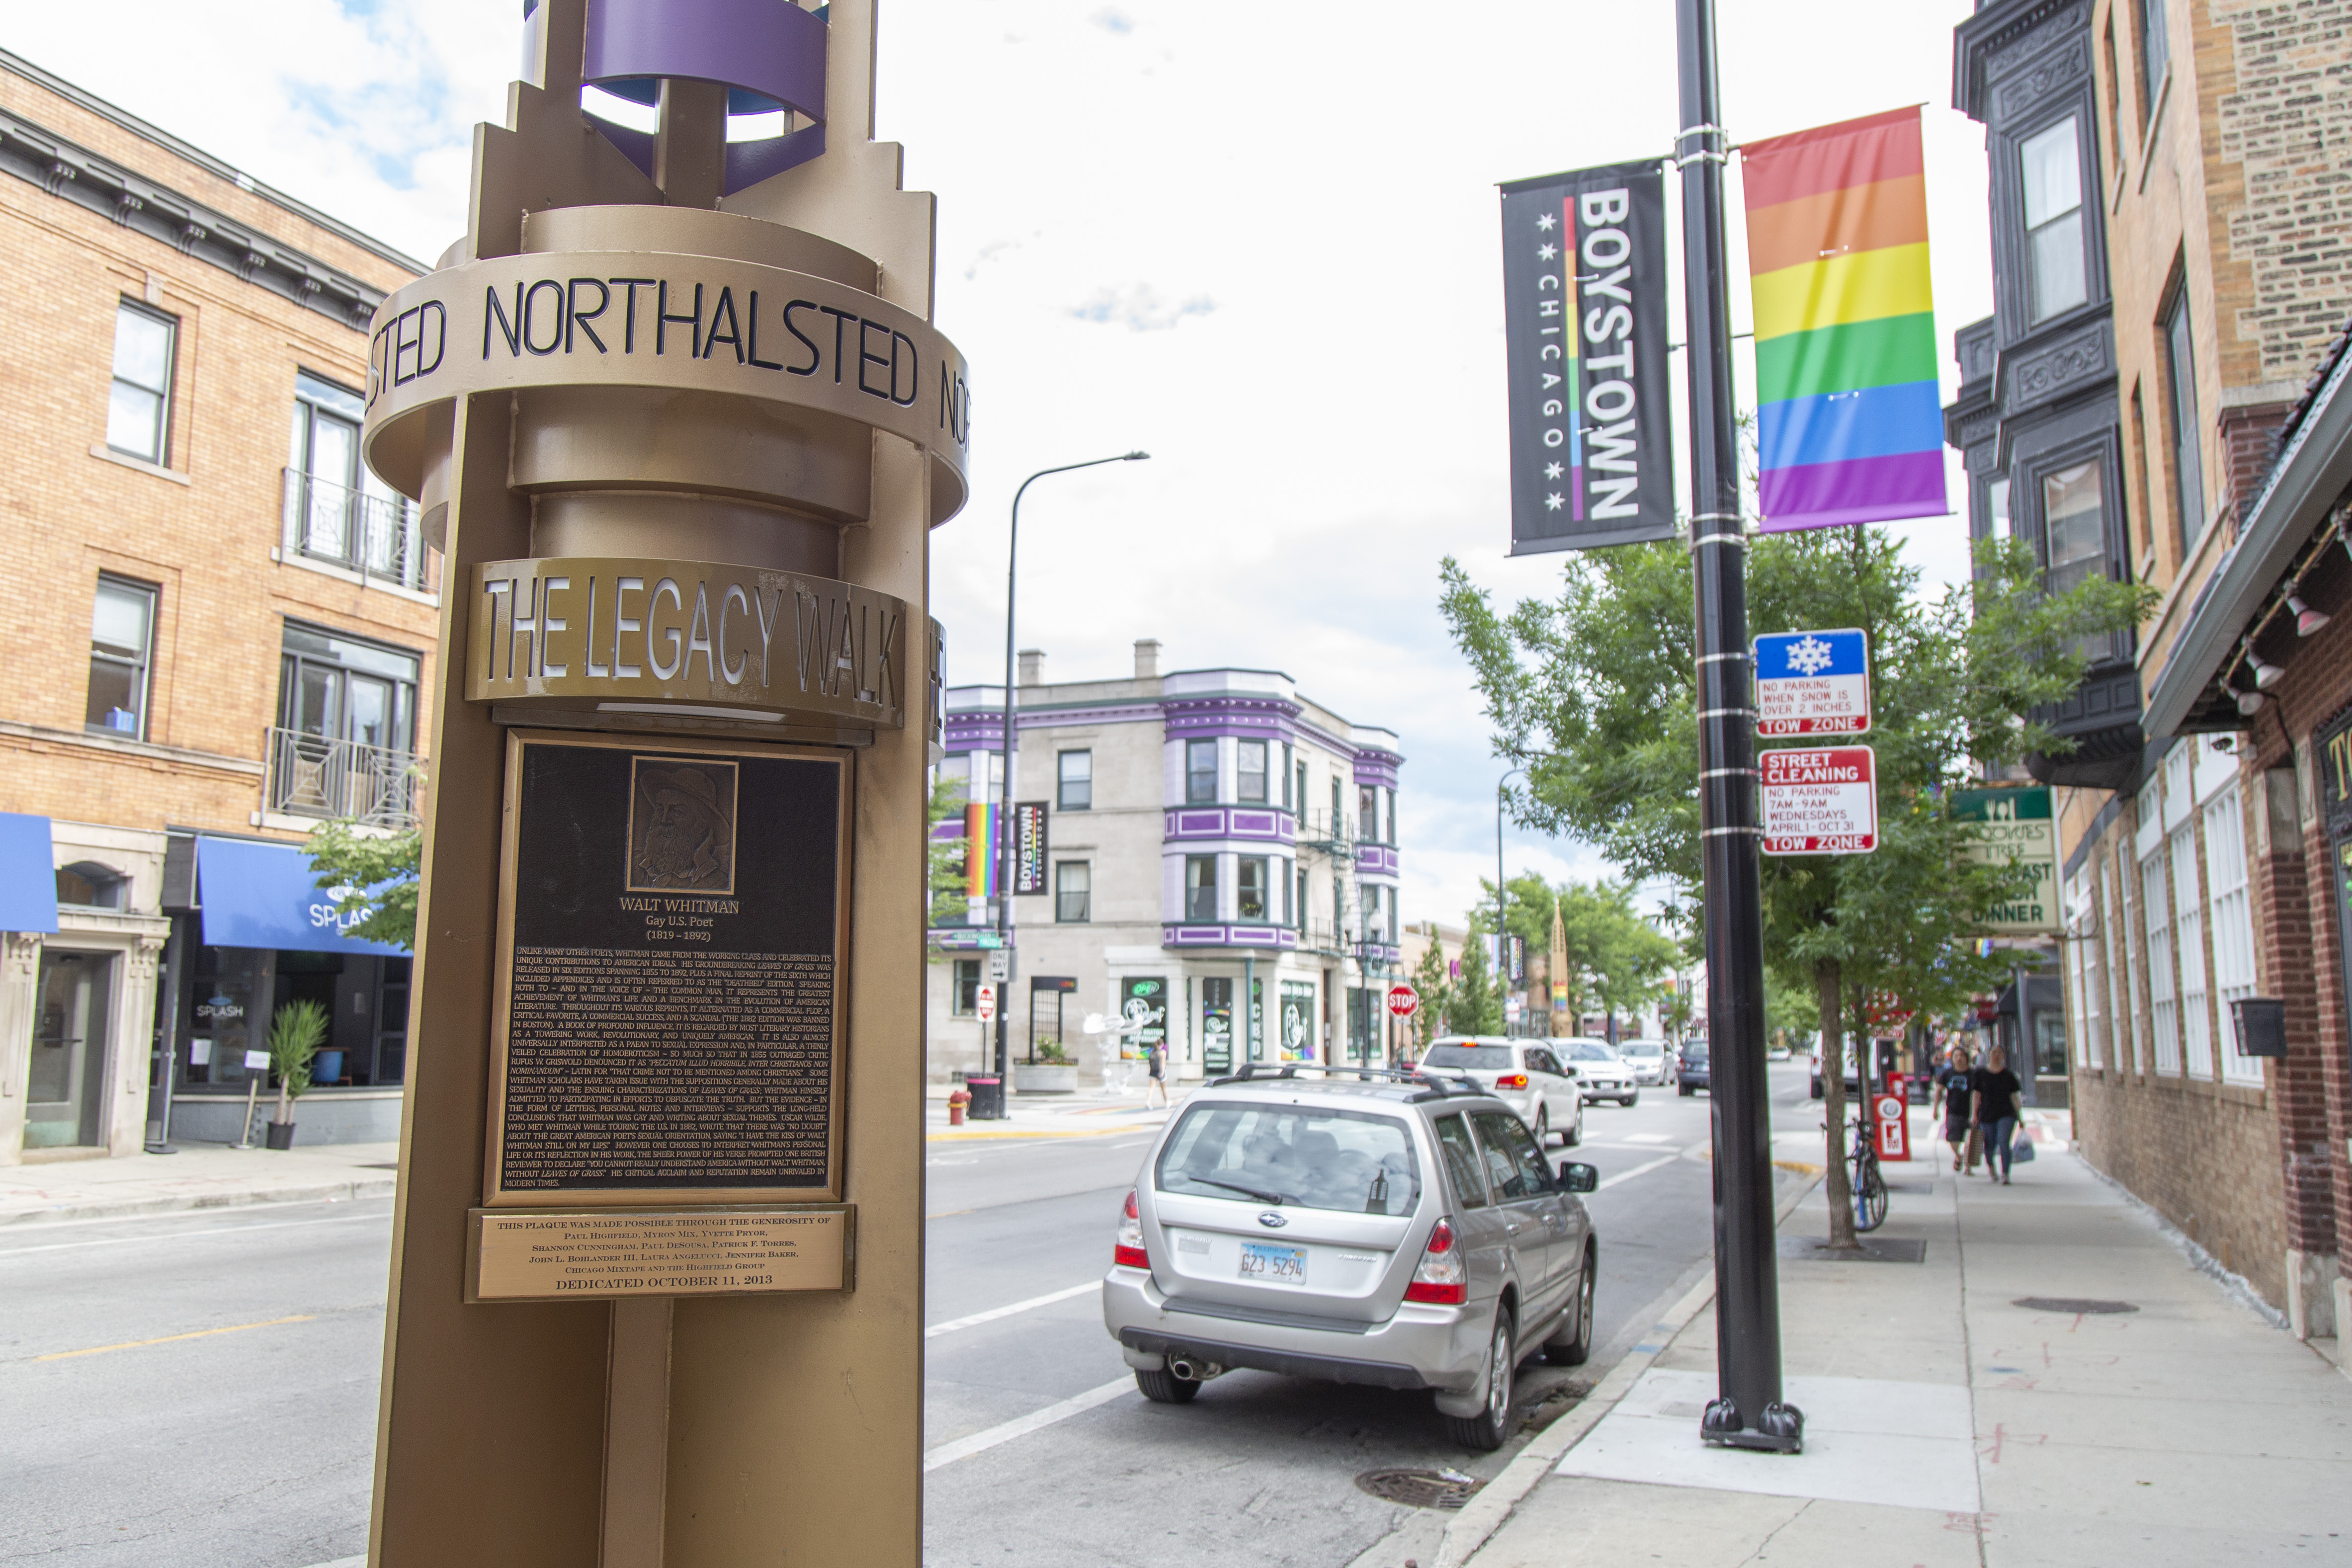 Banners in the east Lake View neighborhood include the “Boystown” nickname for the area.